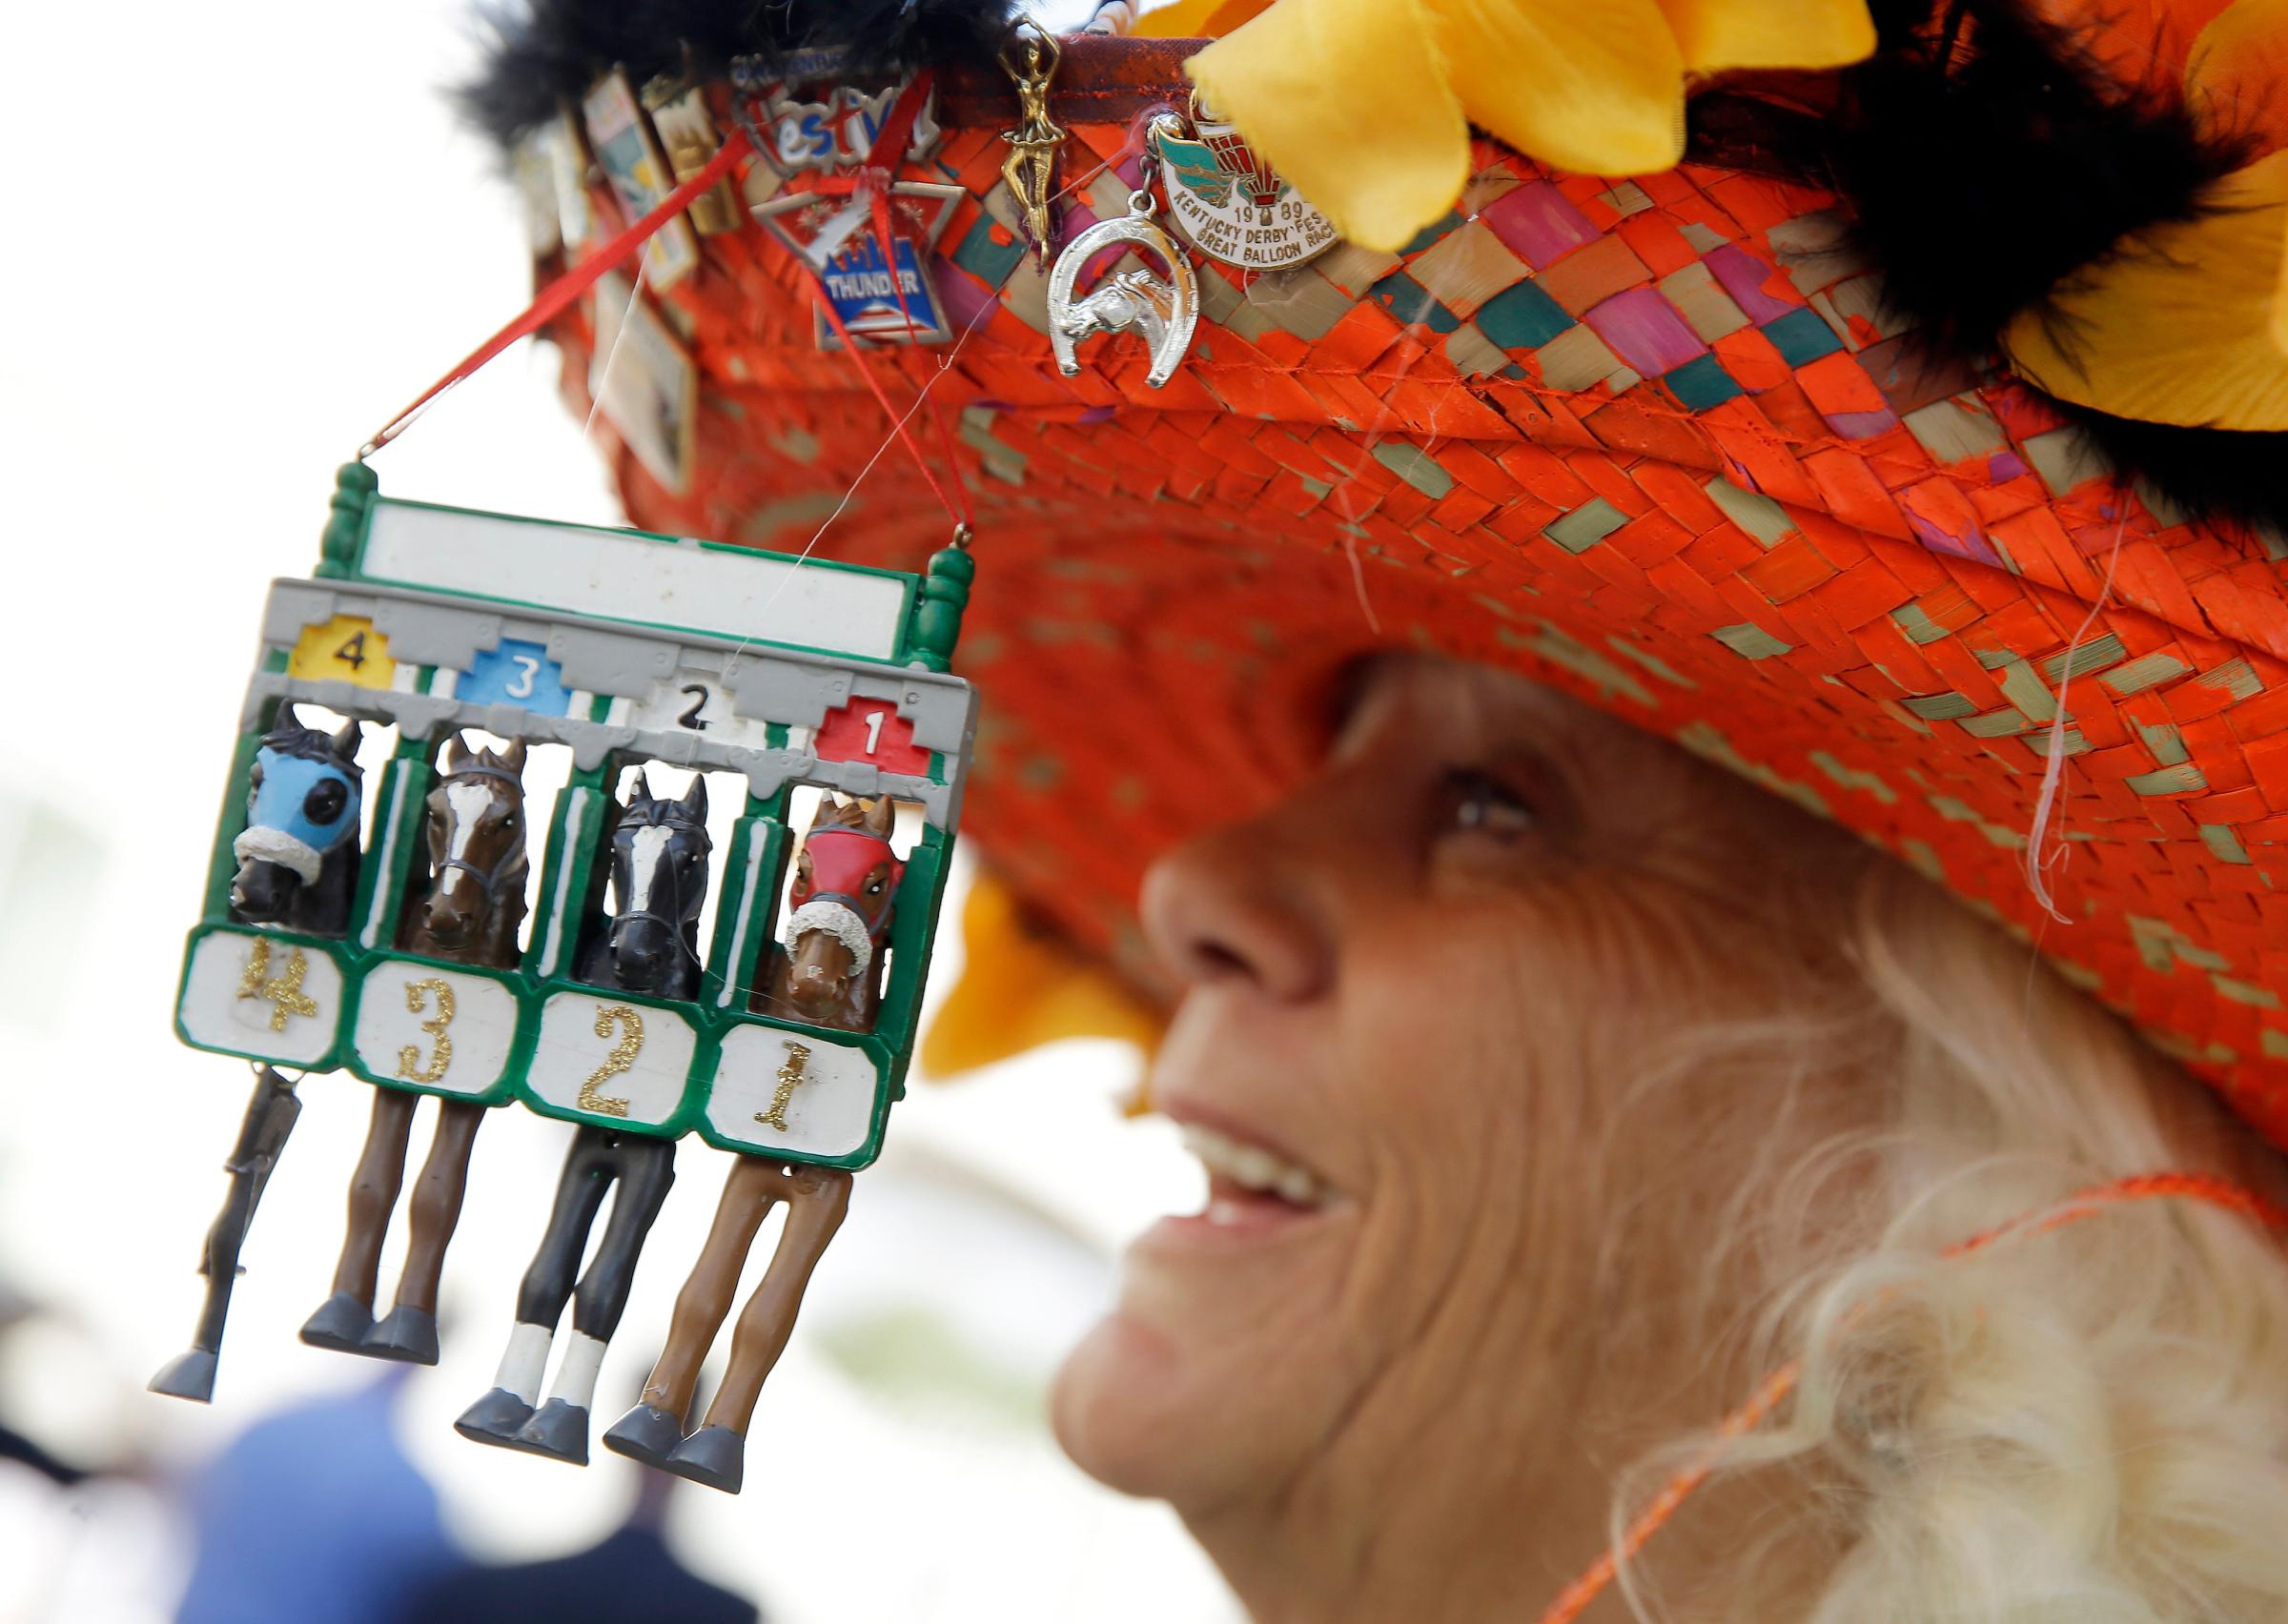 Woman with a hat during the 141st running of the Kentucky Oaks horse race at Churchill Downs on May 1, 2015, in Louisville, Ky.